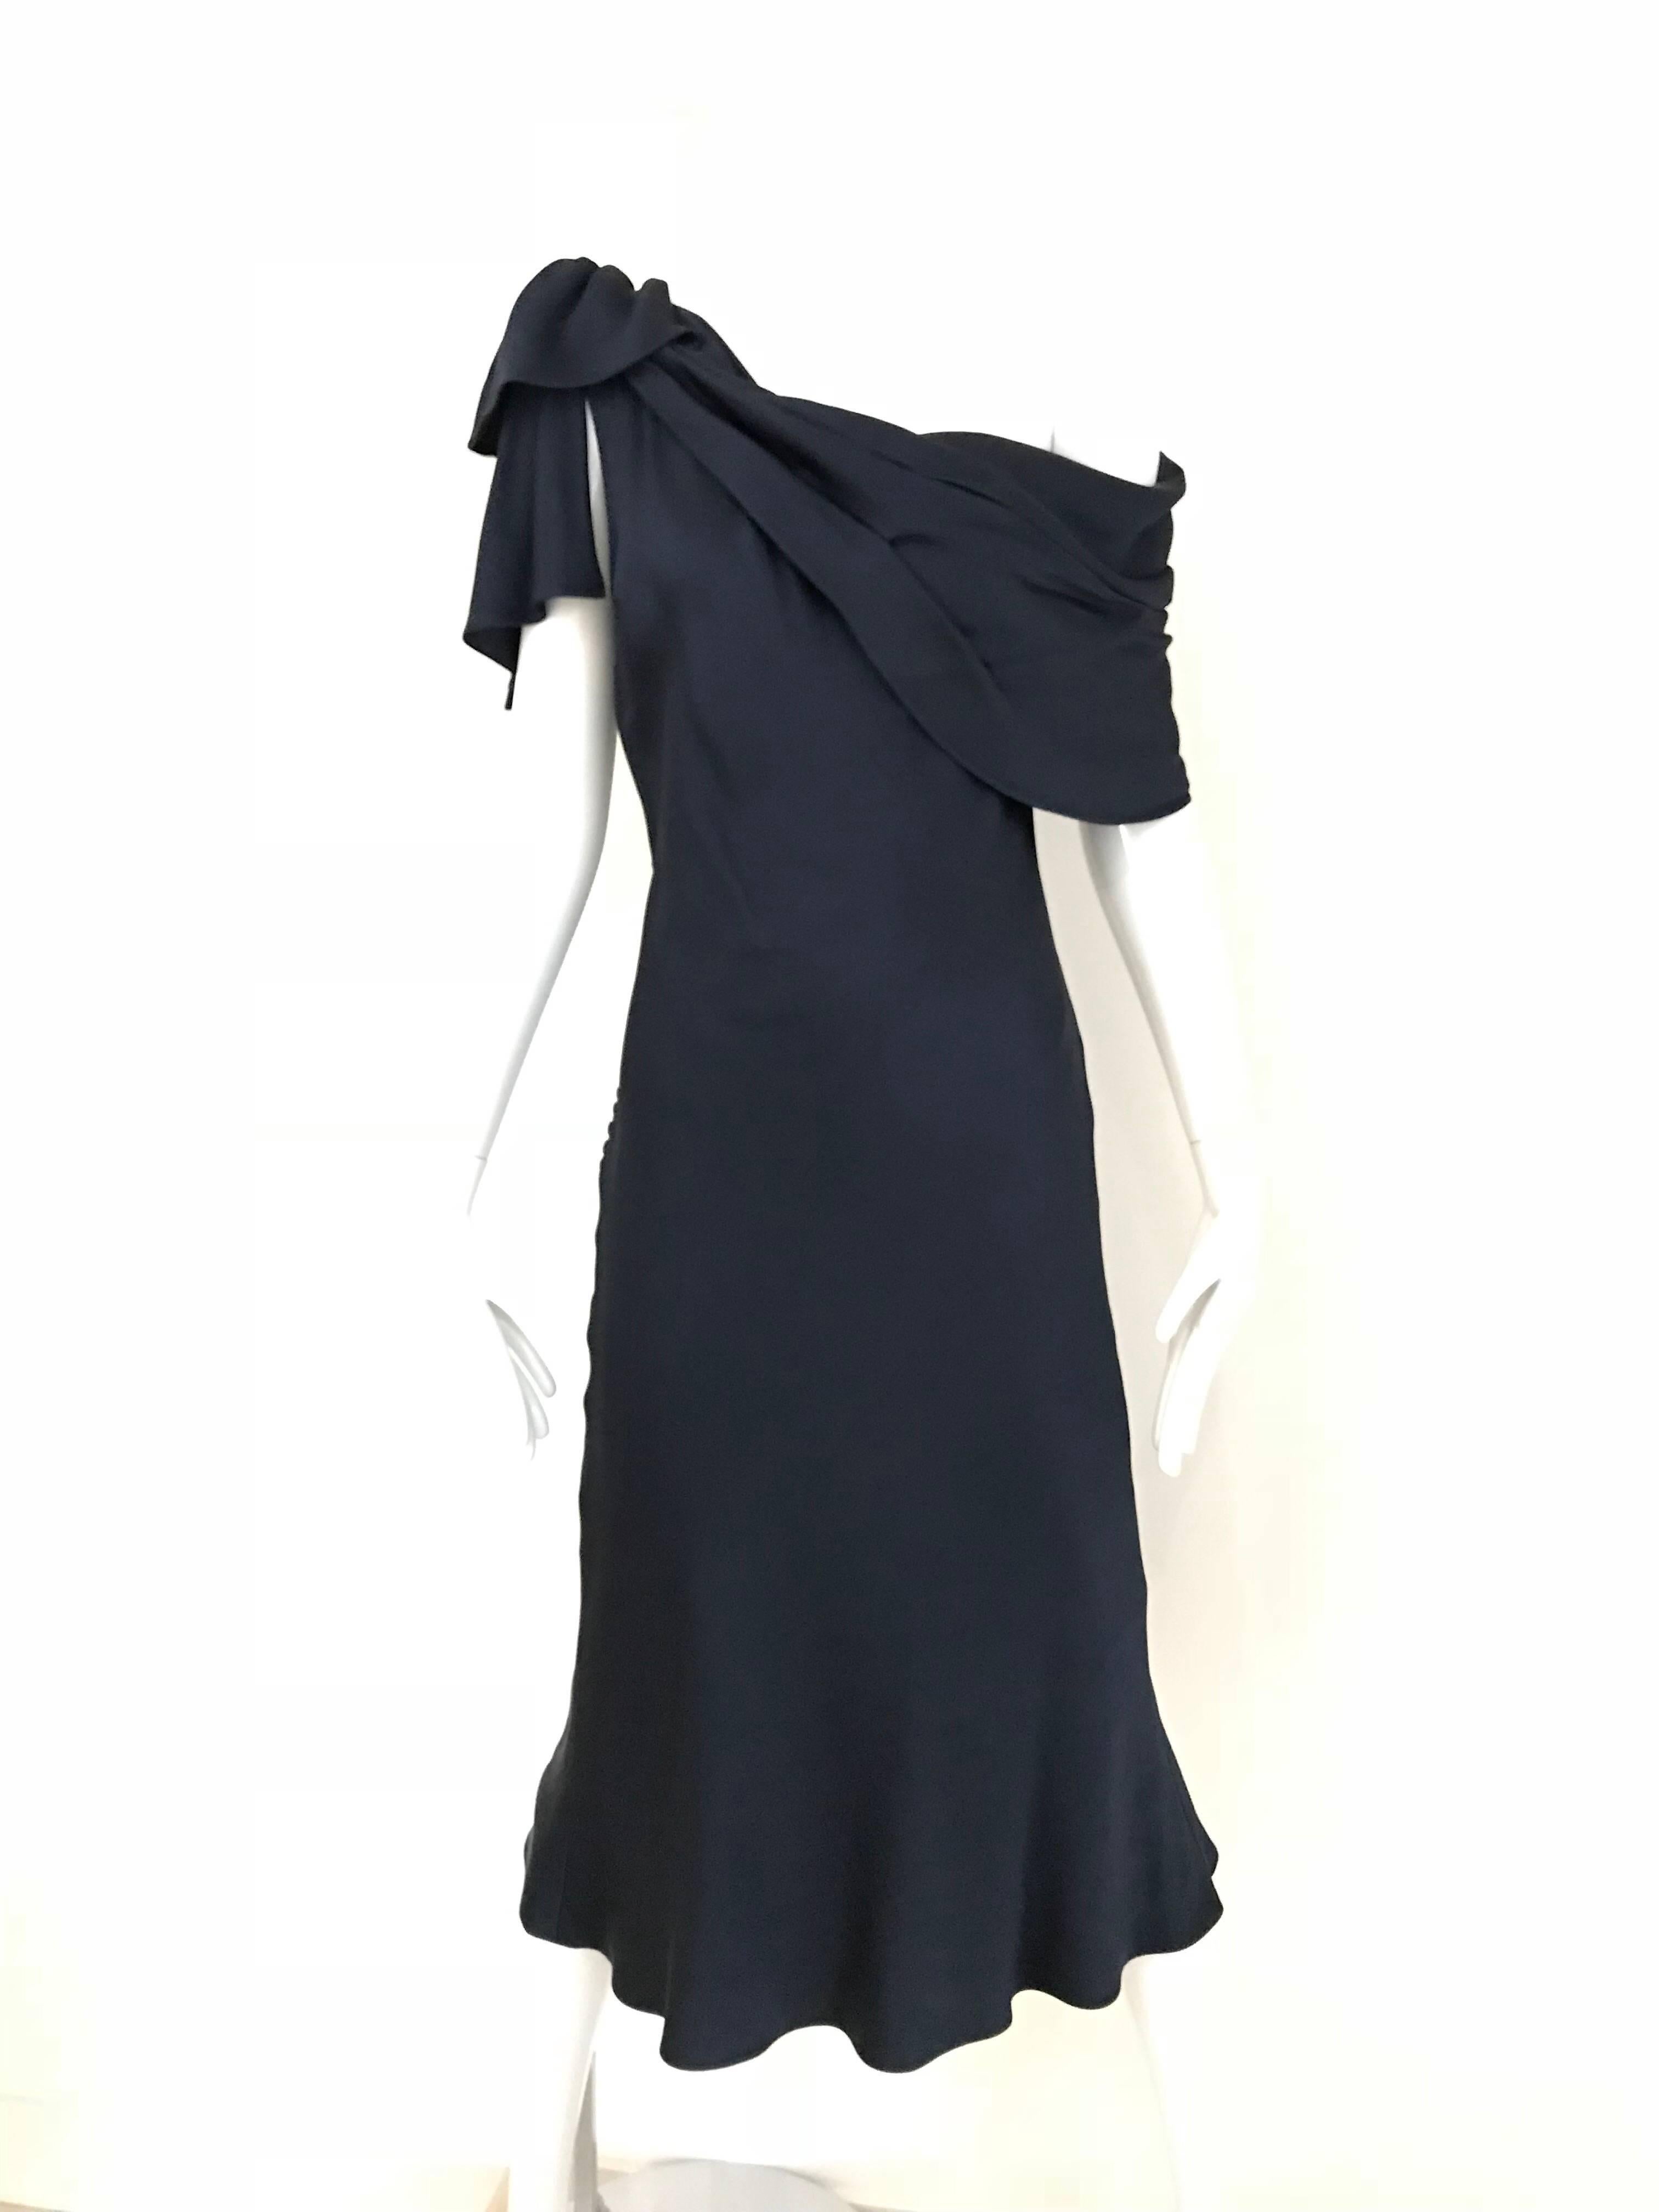 Christian Dior  Galliano Navy Blue Silk charmeuse  One Shoulder Cocktail Dress 1